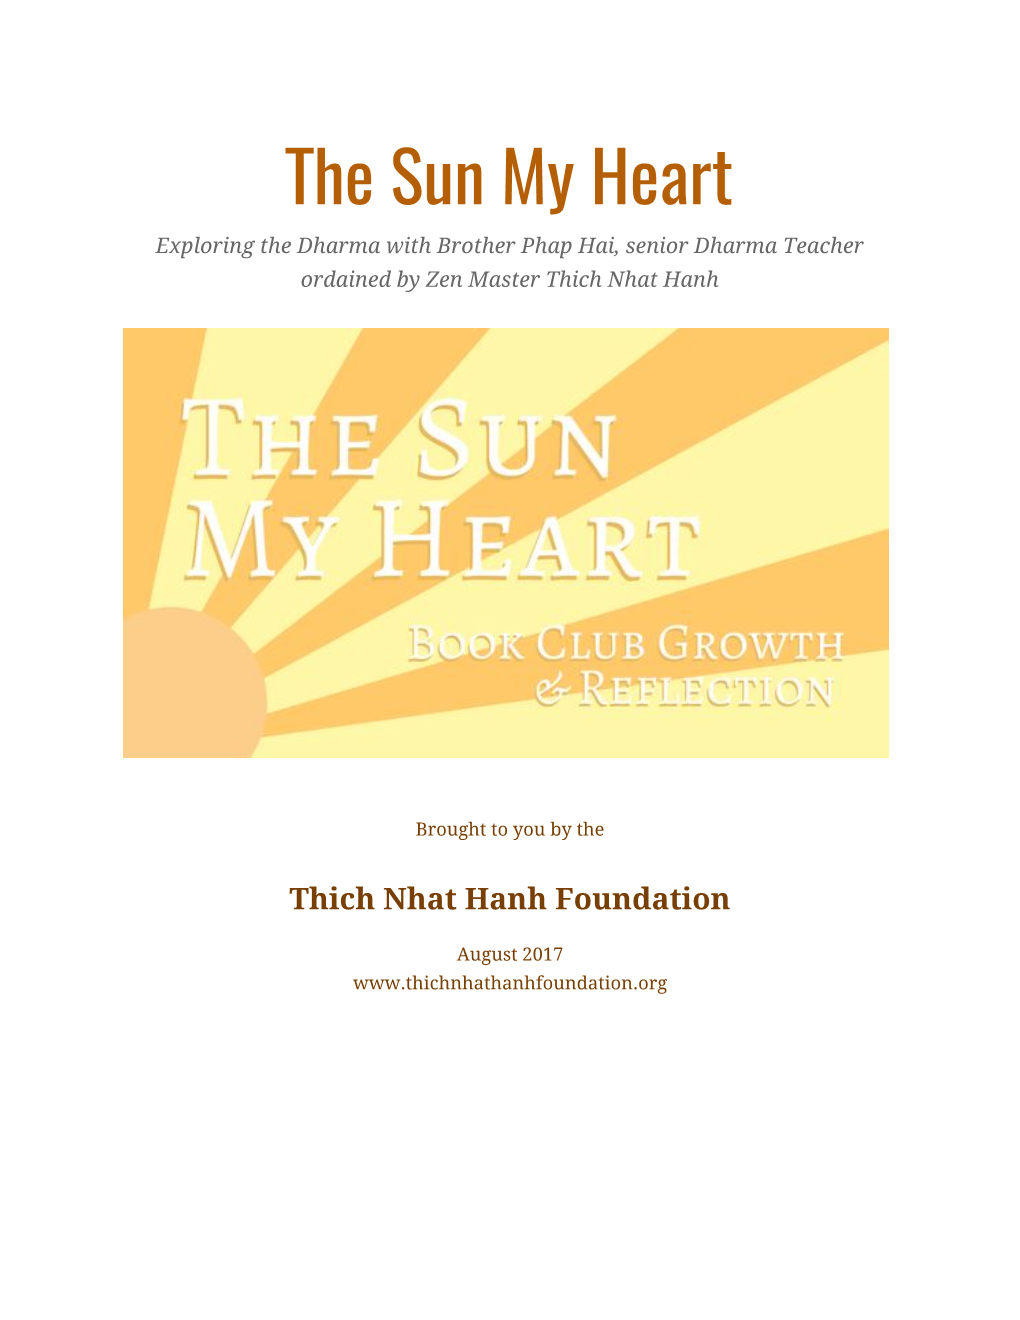 The Sun My Heart Exploring the Dharma with Brother Phap Hai, Senior Dharma Teacher Ordained by Zen Master Thich Nhat Hanh